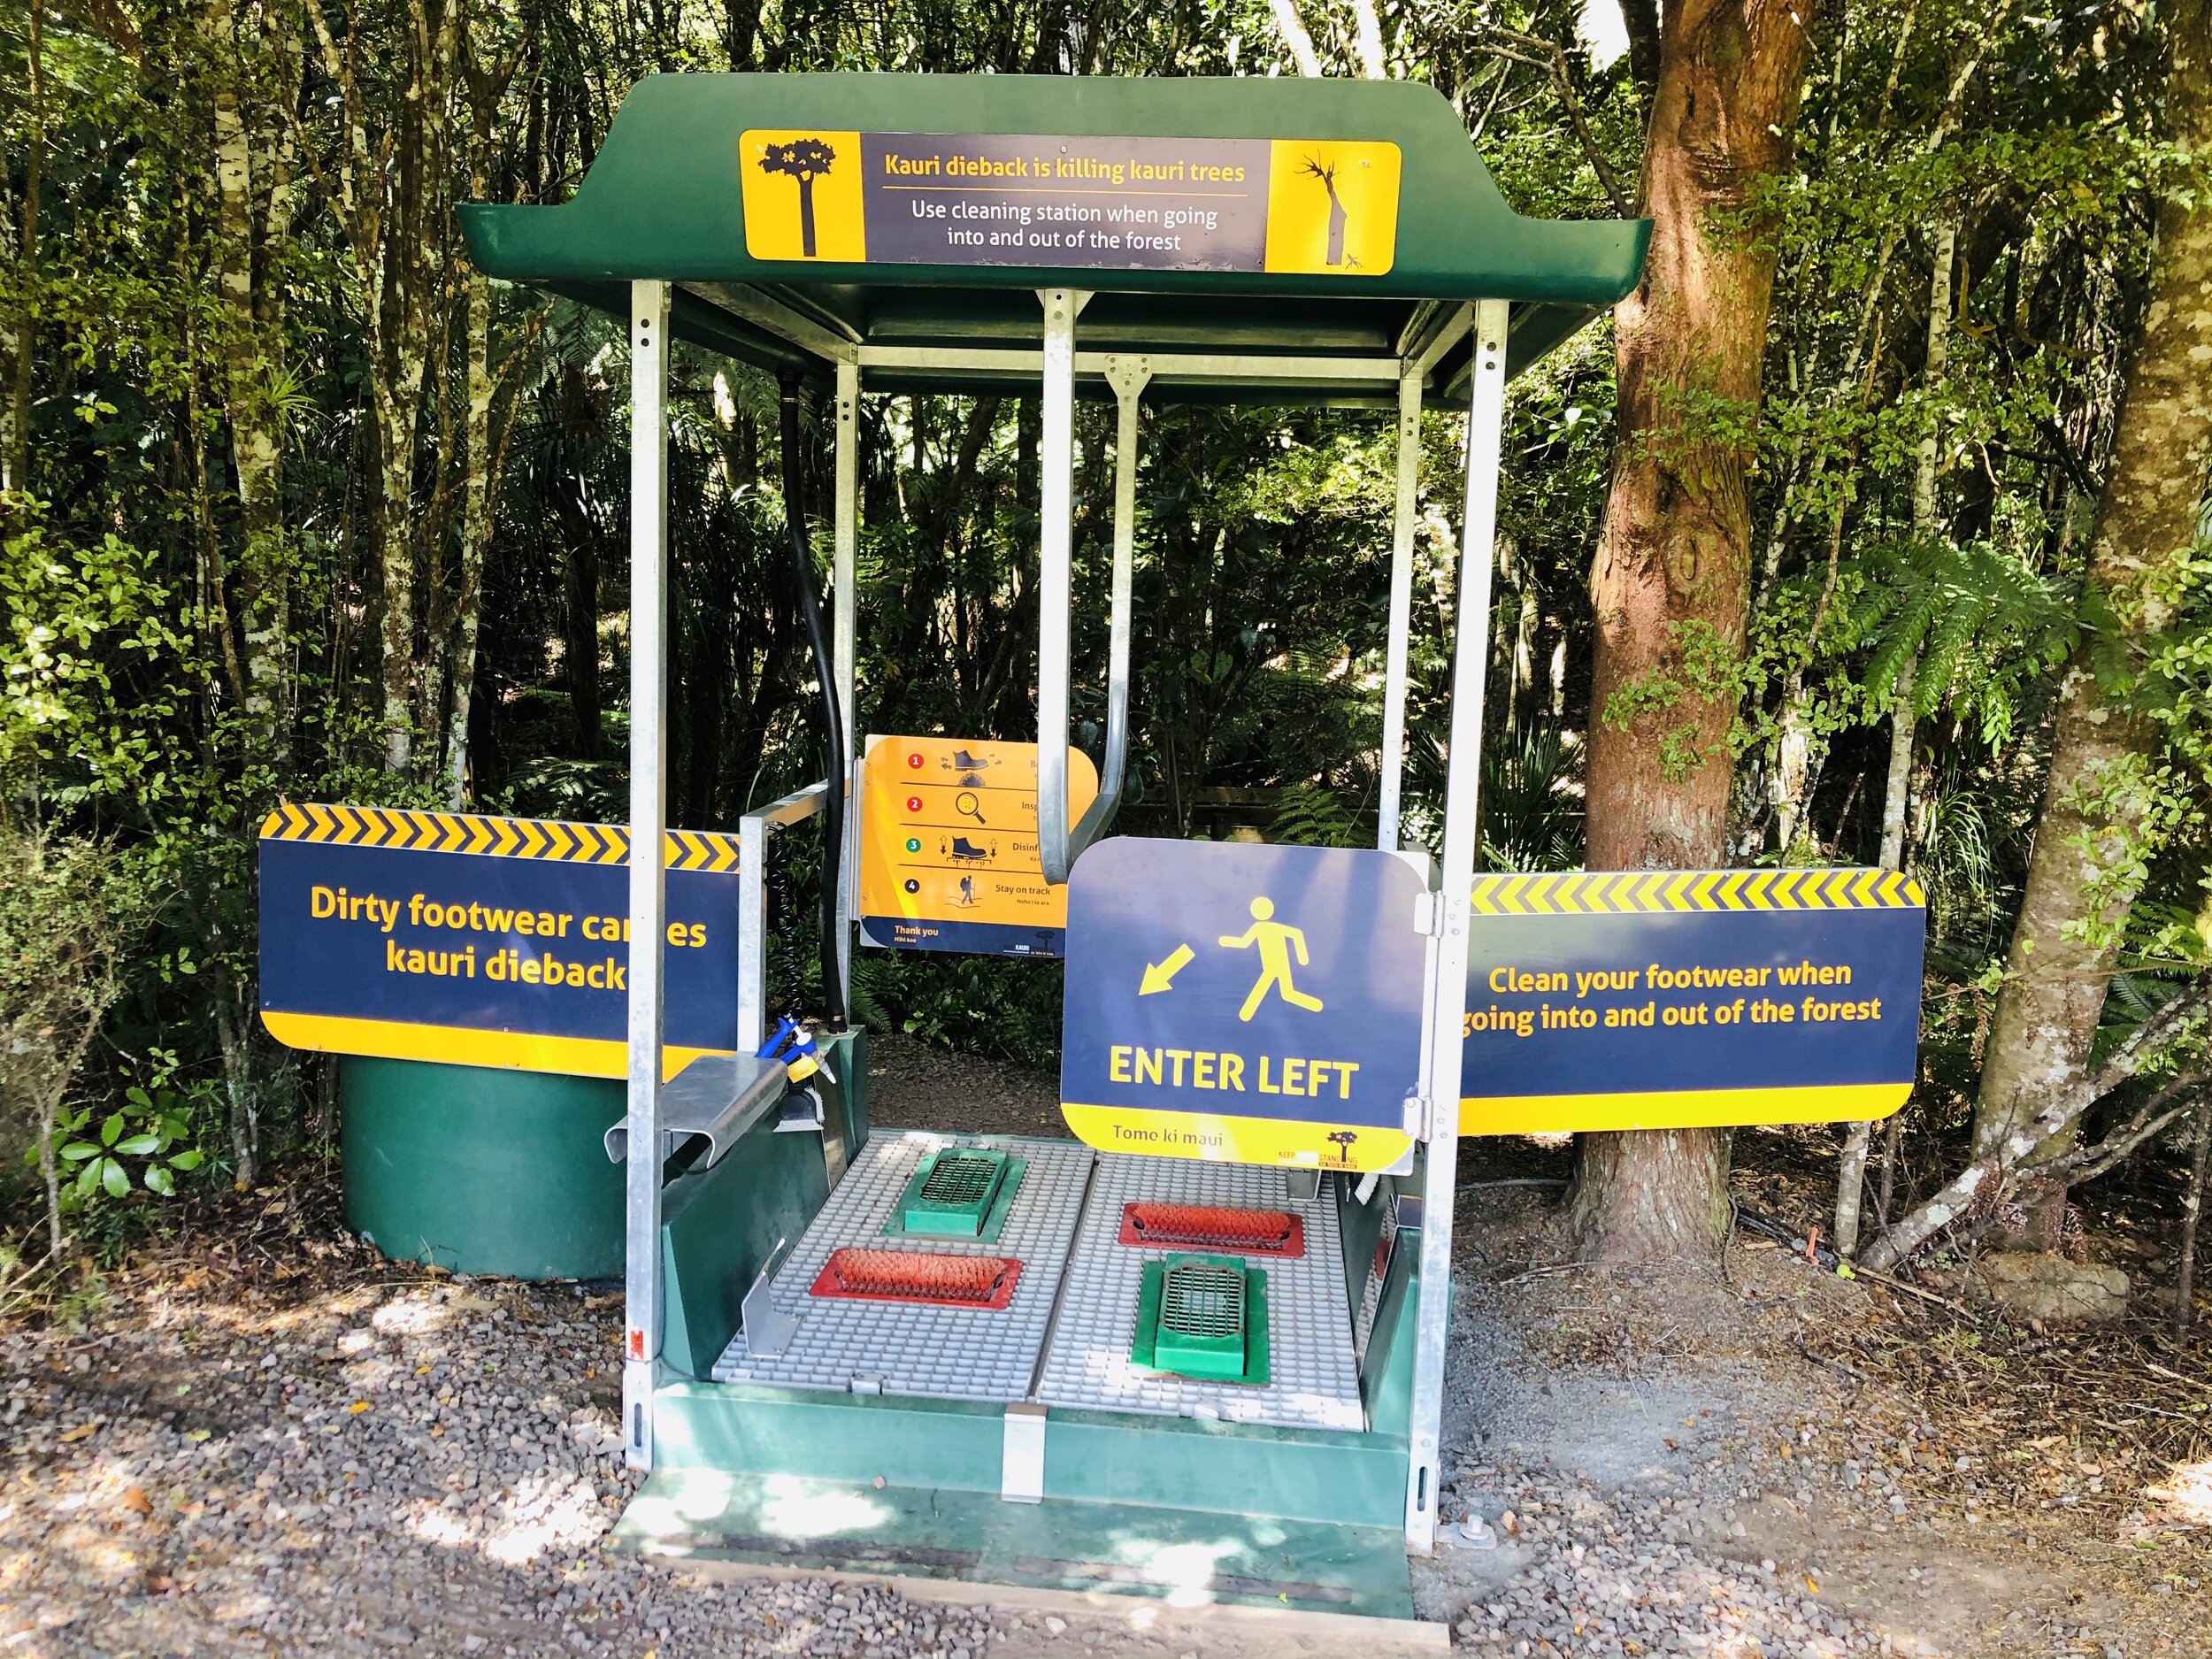  The New Zealand Department of Conservation and its partners take very seriously this threat to the remaining large kauri trees. Visitors are encouraged to clean and disinfect footwear and other equipment before and after entering kauri forest, 